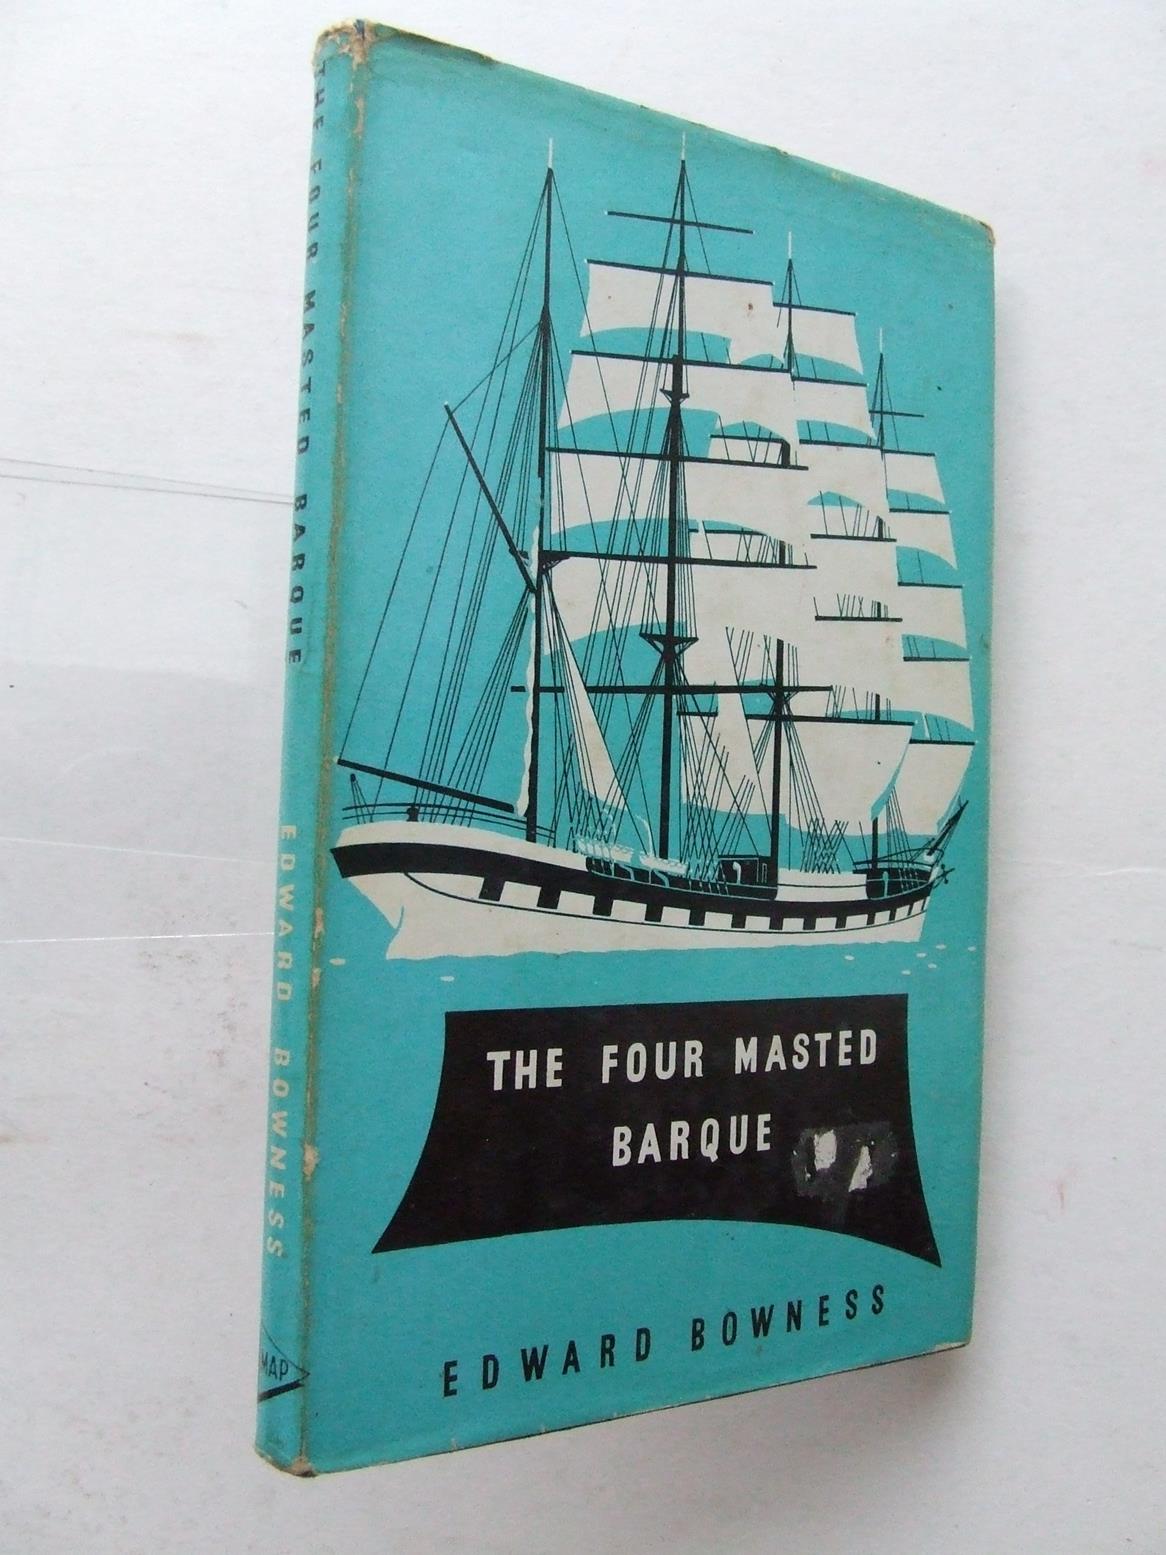 The Four Masted Barque